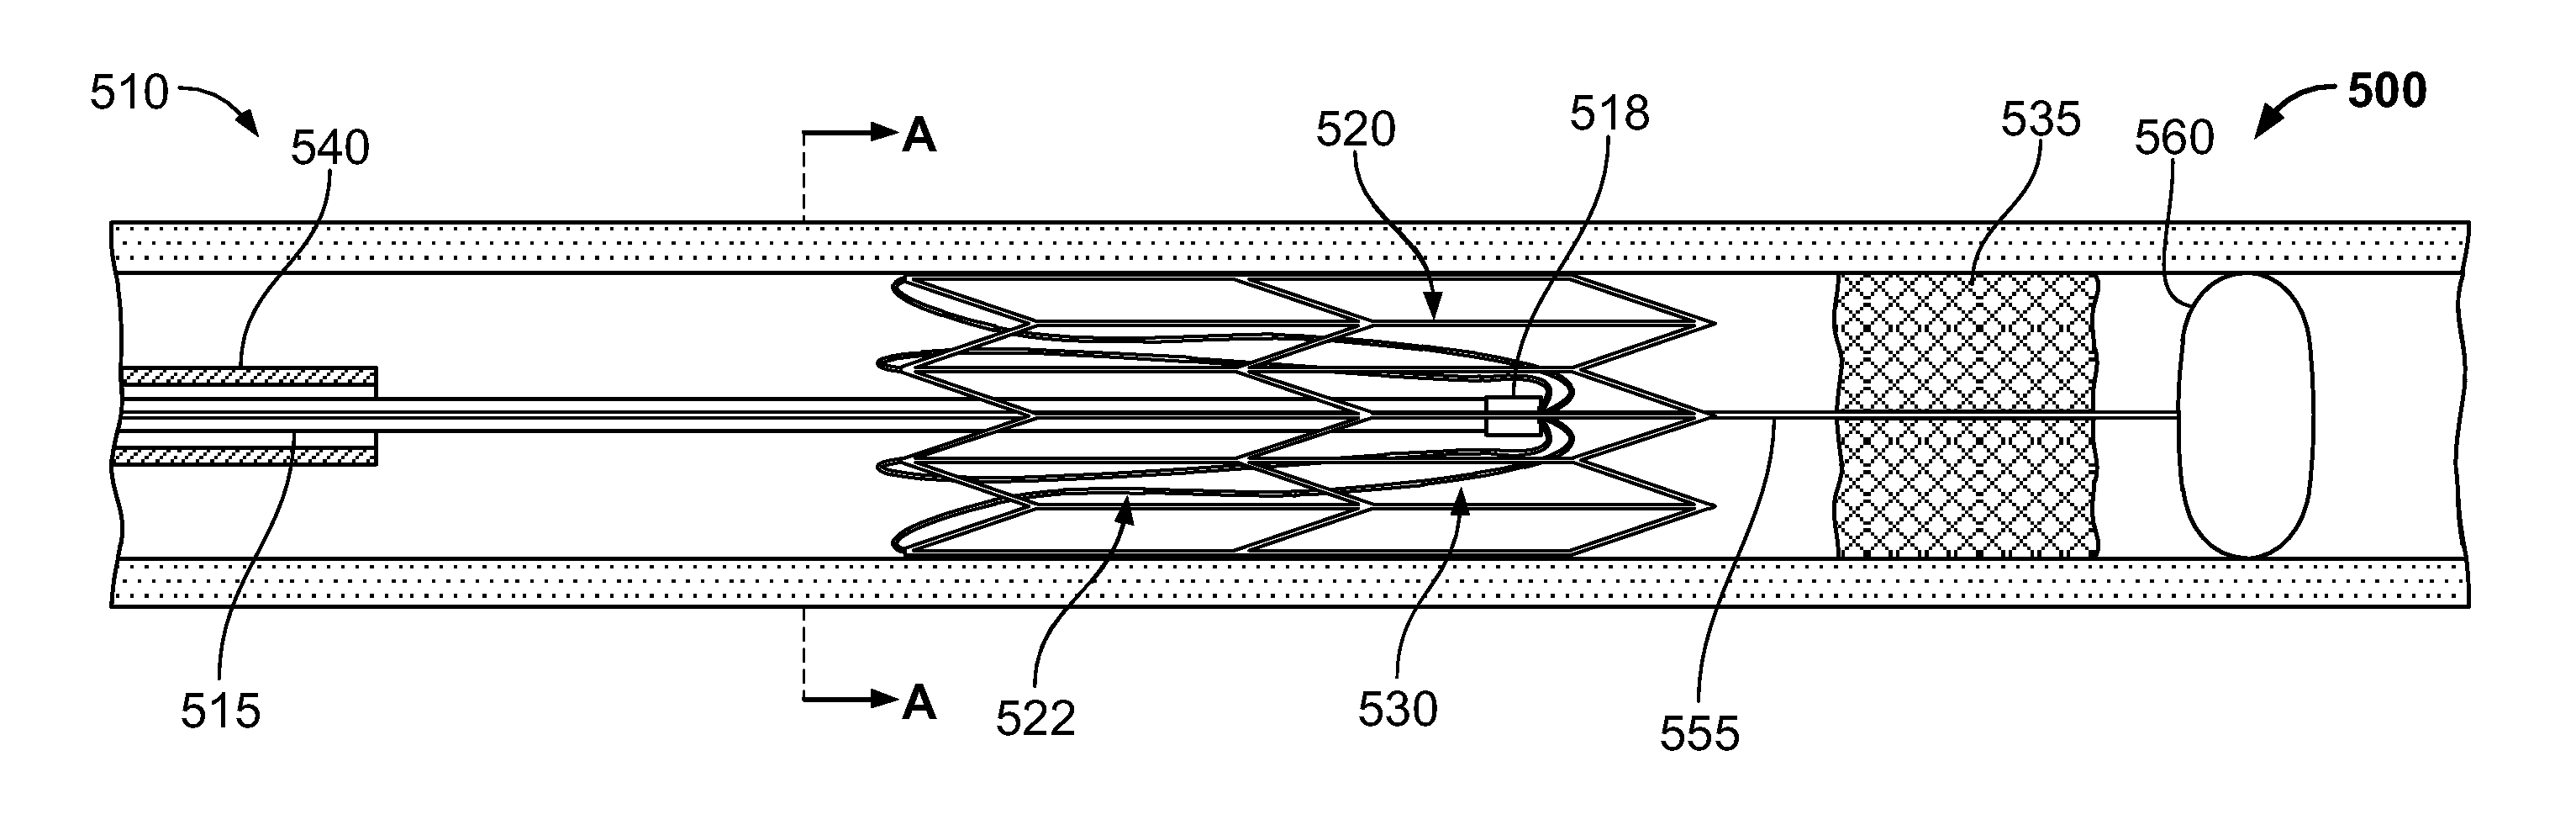 Devices and systems for thrombus treatment